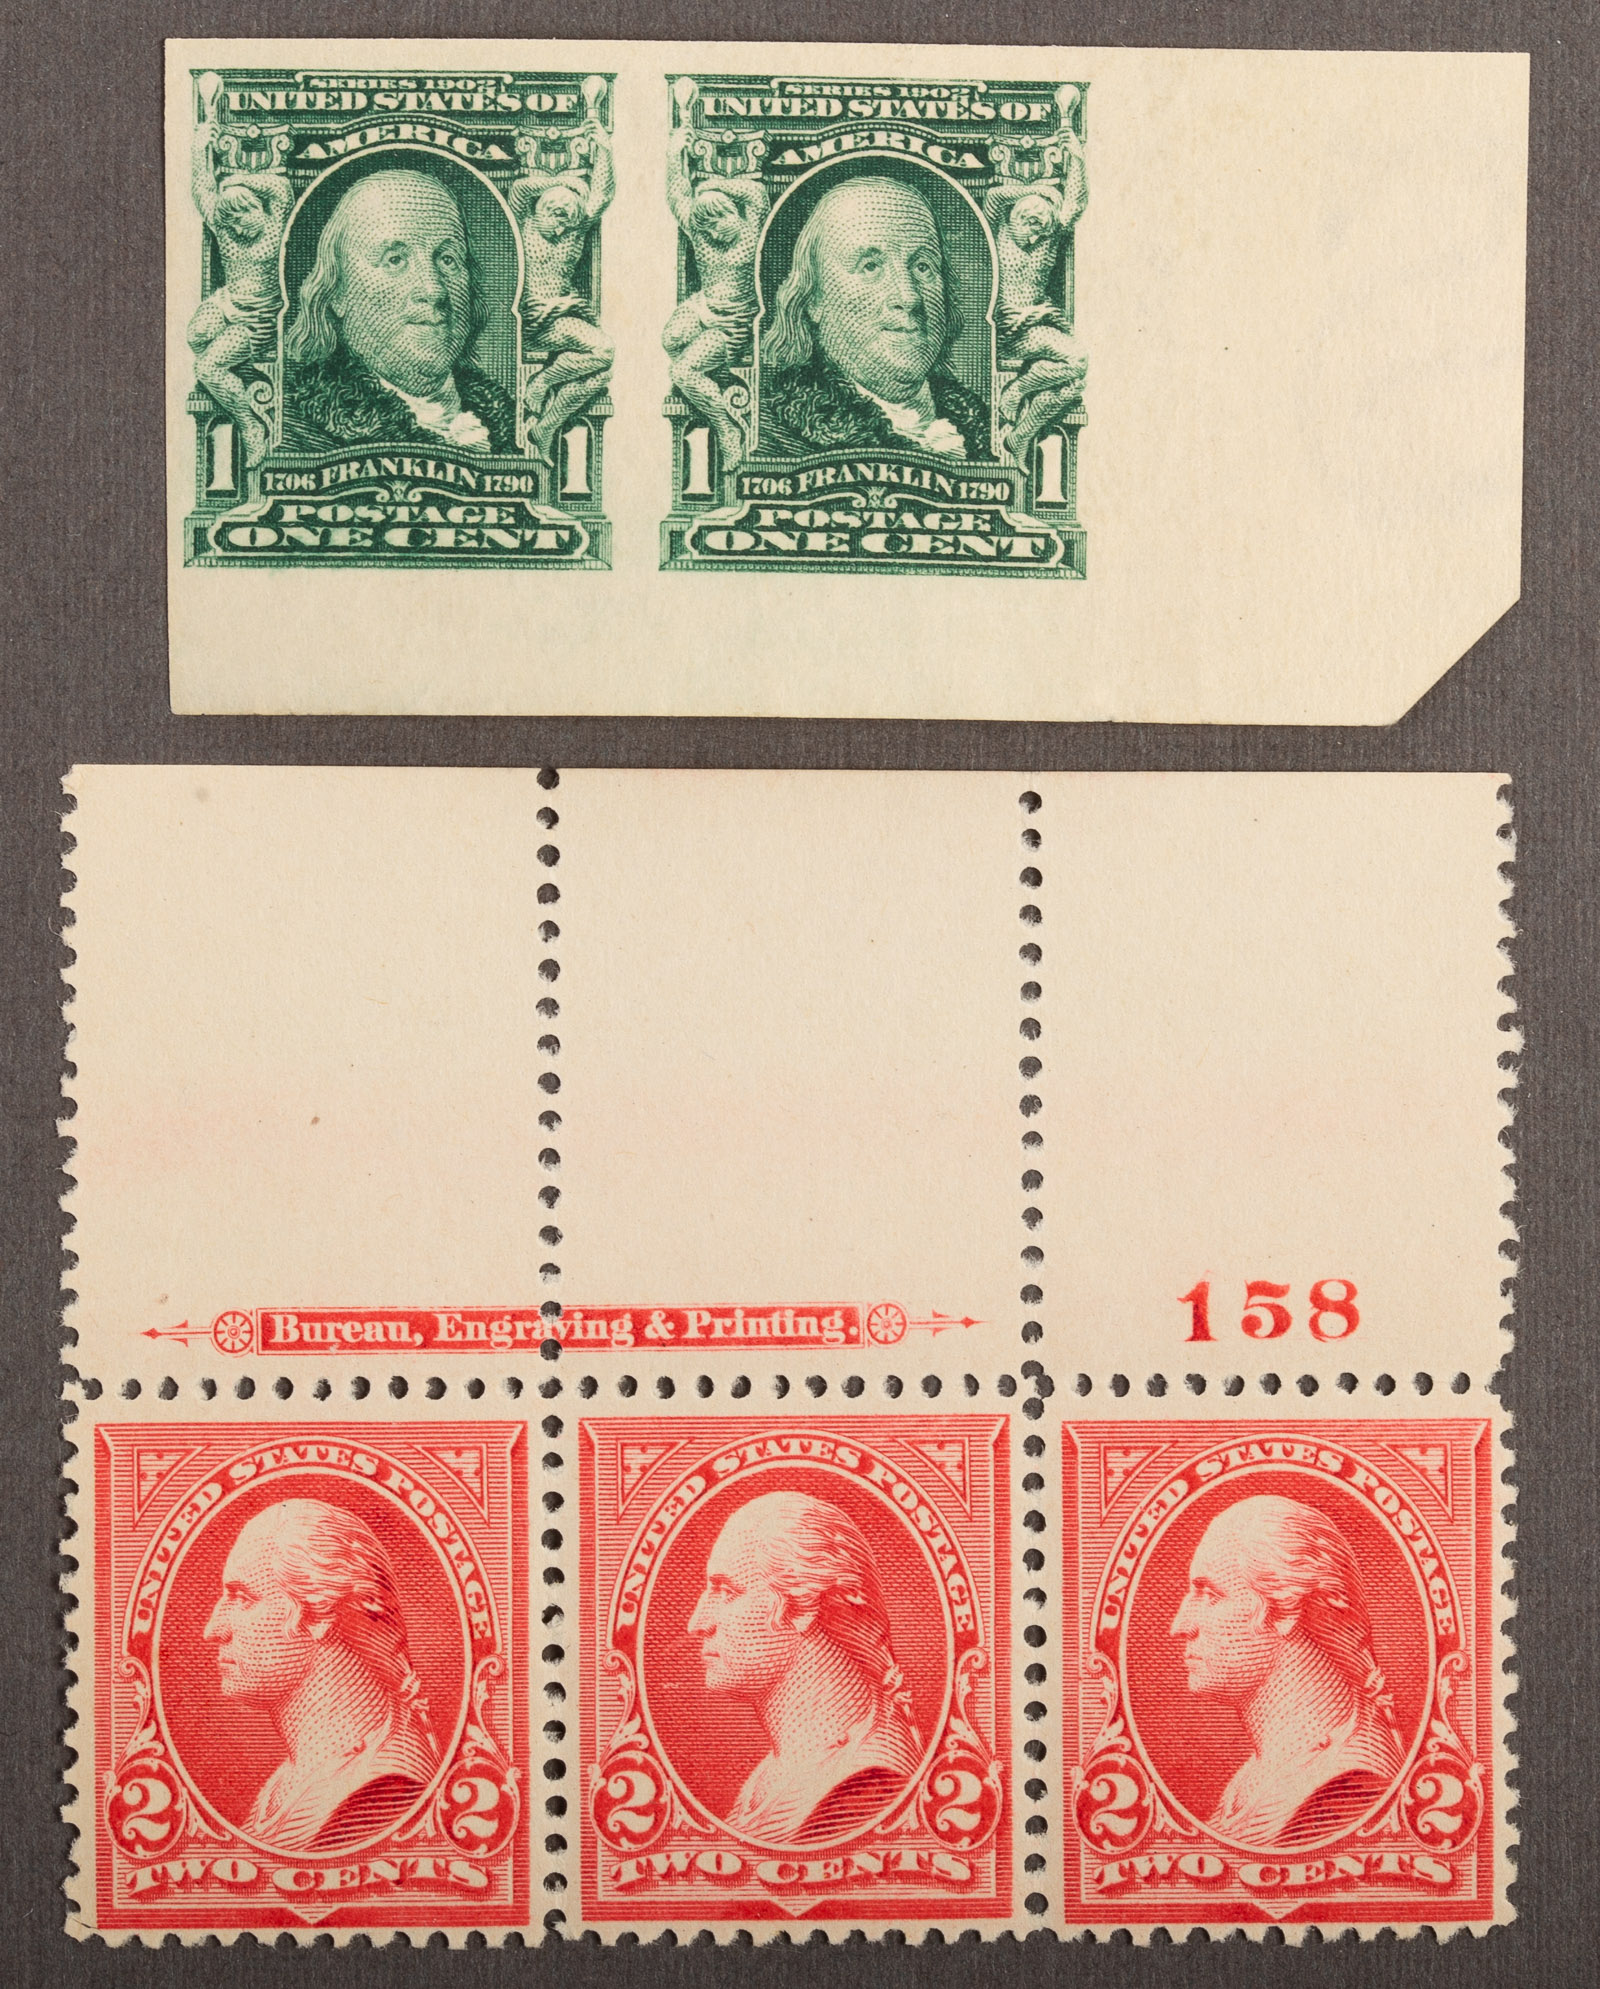 GROUP OF U.S. POSTAGE STAMPS, 1895